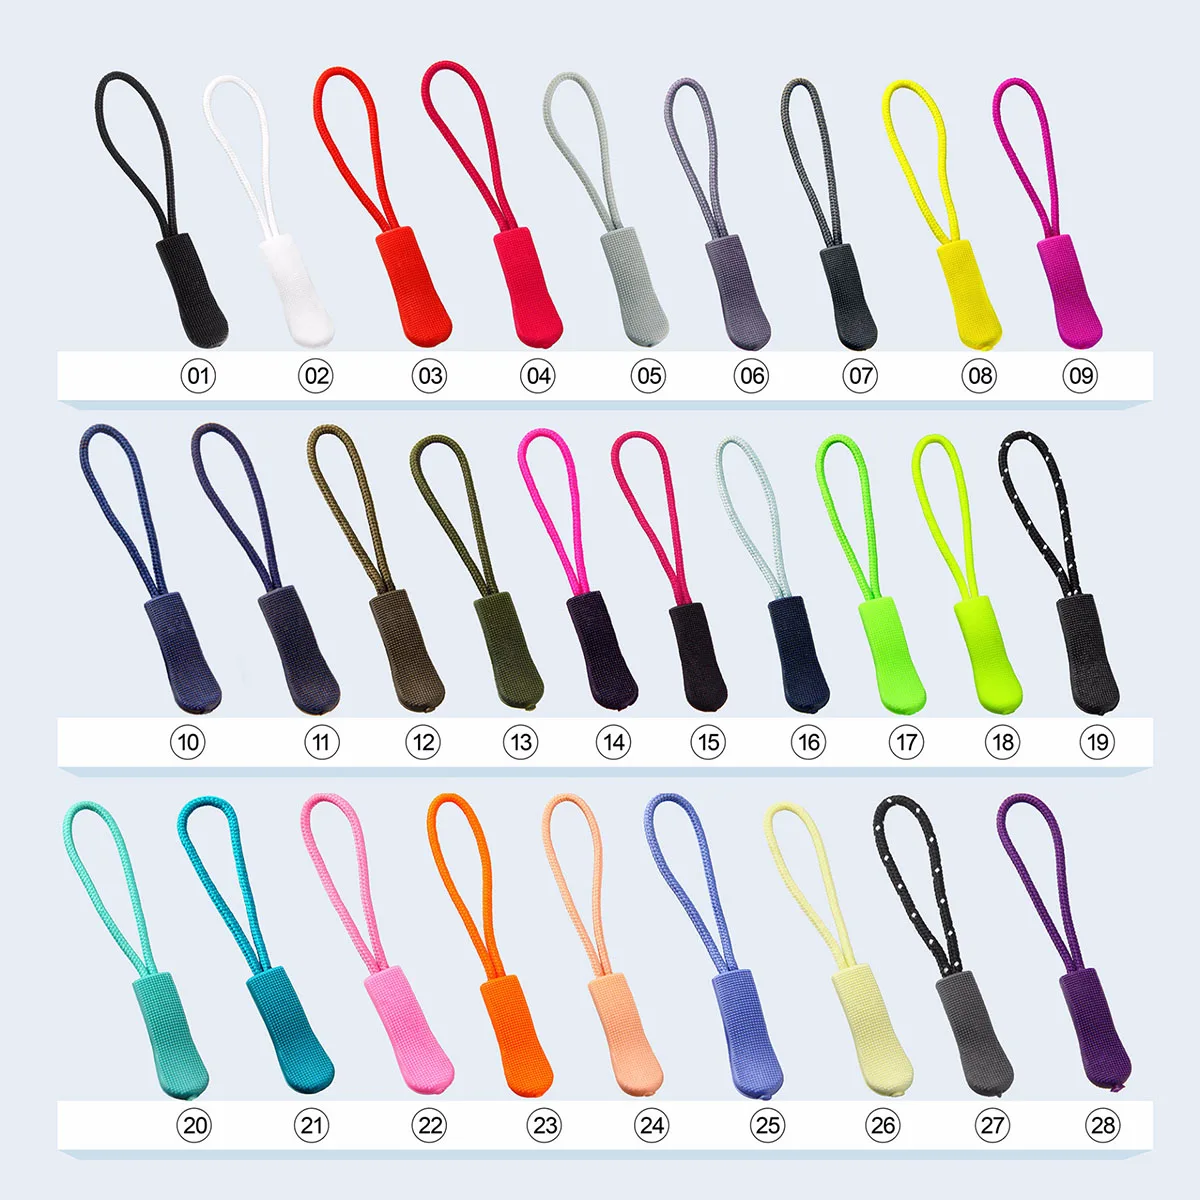 10pcs-Colorful-Zipper-Pull-Cord-Zip-Puller-High-quality-Replacement ...